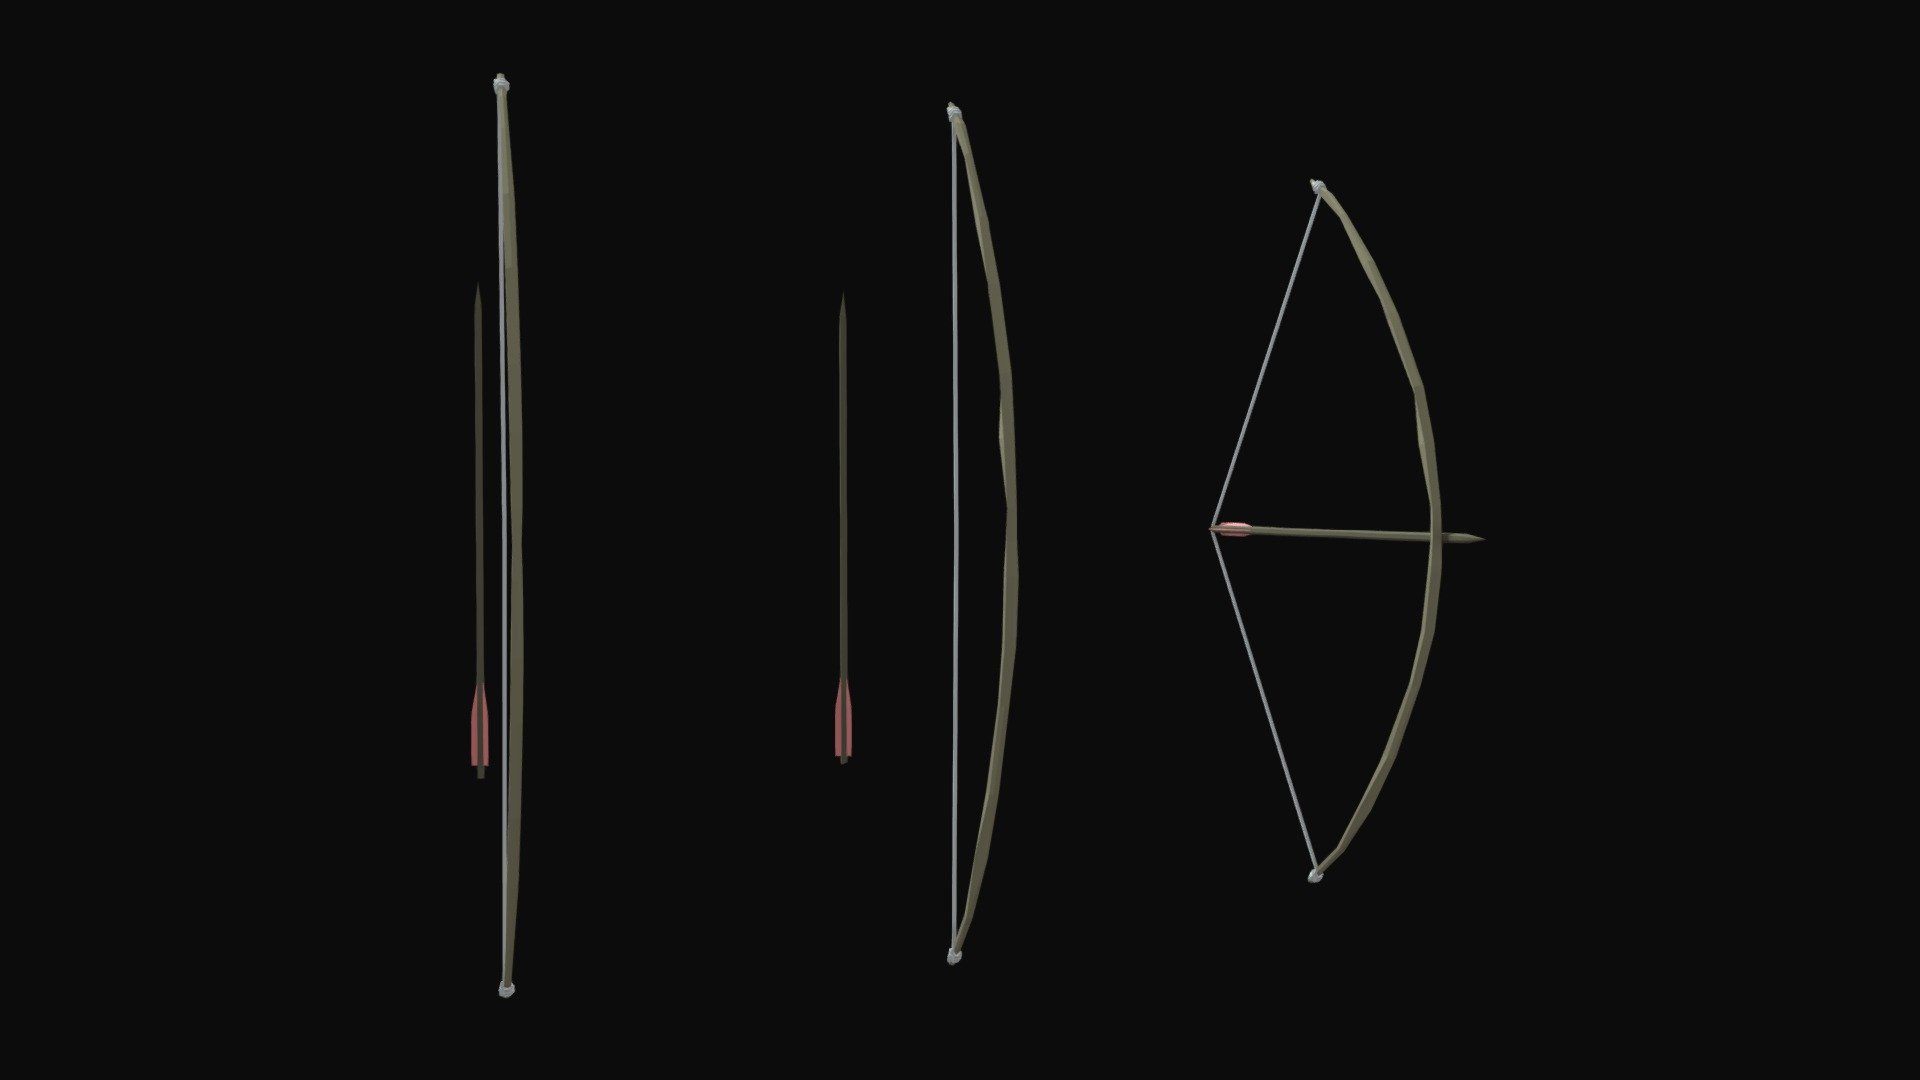 A low poly model of a Bow and Arrow

Rigged for bending and string pulling

Included
2 Bows
2 Arrows

One of the bows and arrows are a cleaner model and look more refined
The other bow and arrow are more primal looking and are less refined

Ideal for for use in games

Tested in unity

Made in blender

Seperate models included in aditional files - Bow And Arrow Low Poly - Buy Royalty Free 3D model by Castletyne 3d model